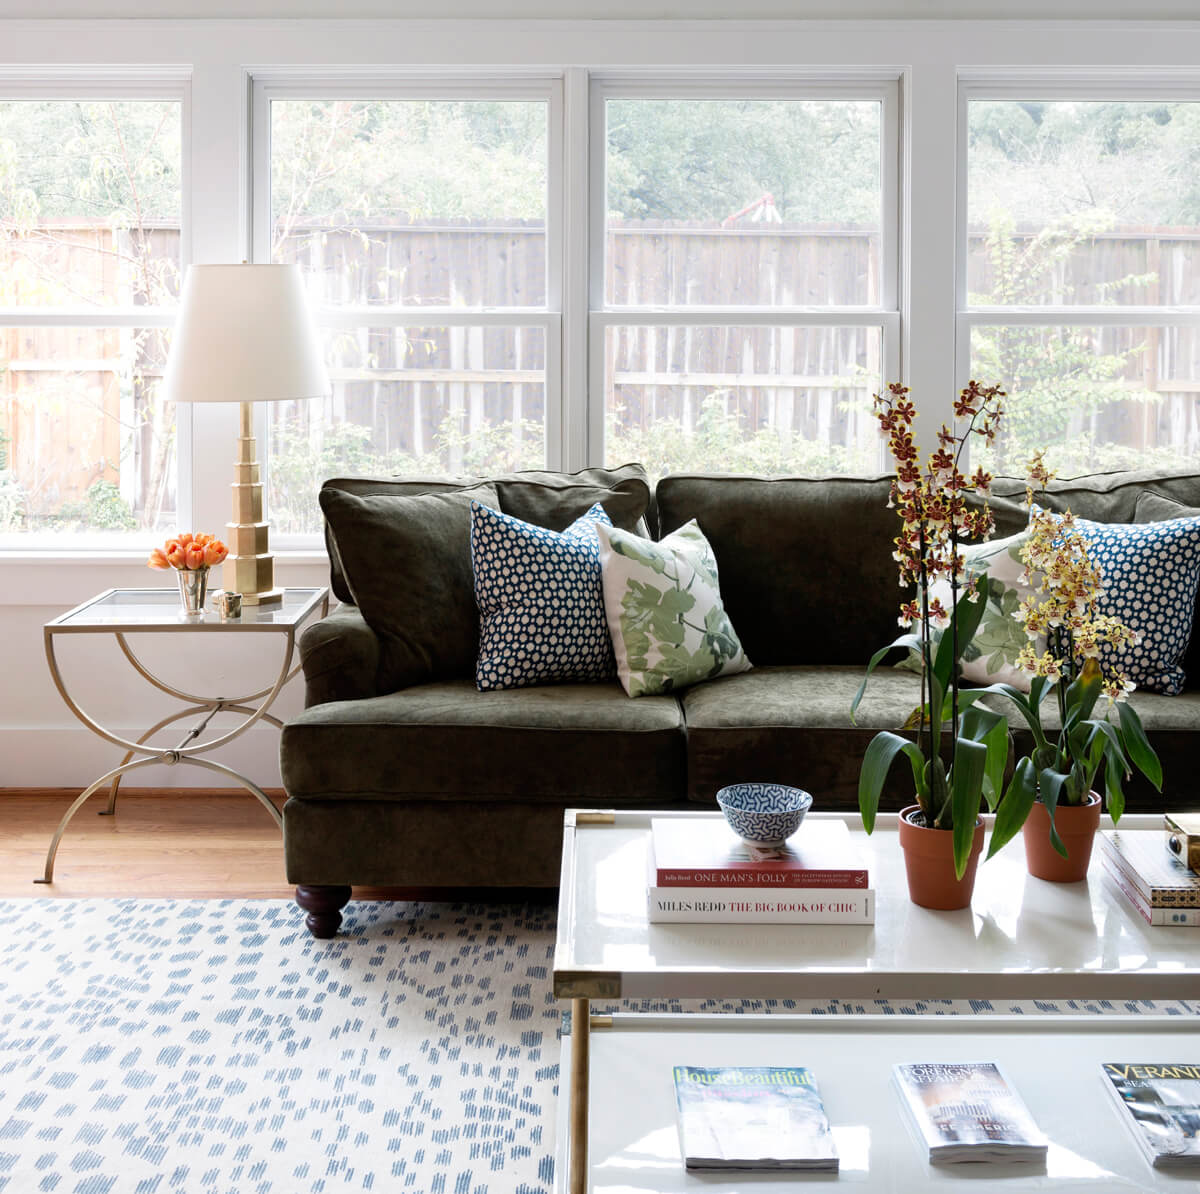 Spring can mean amazing interior decor for your home!